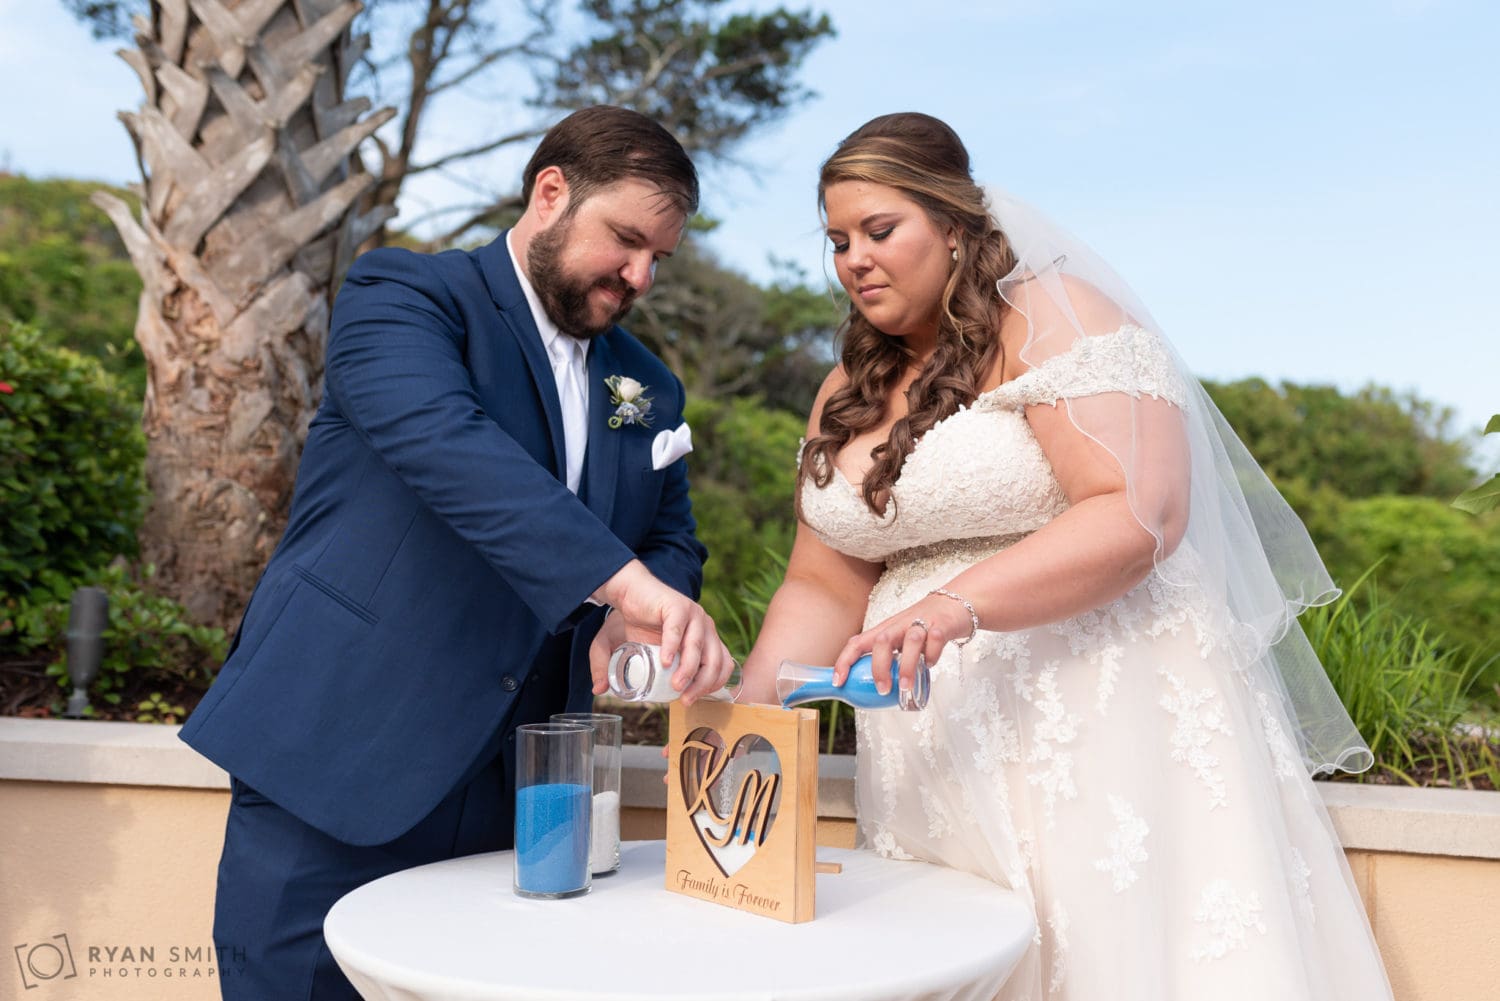 Bride and groom pouring sand together Grande Dunes Ocean Club